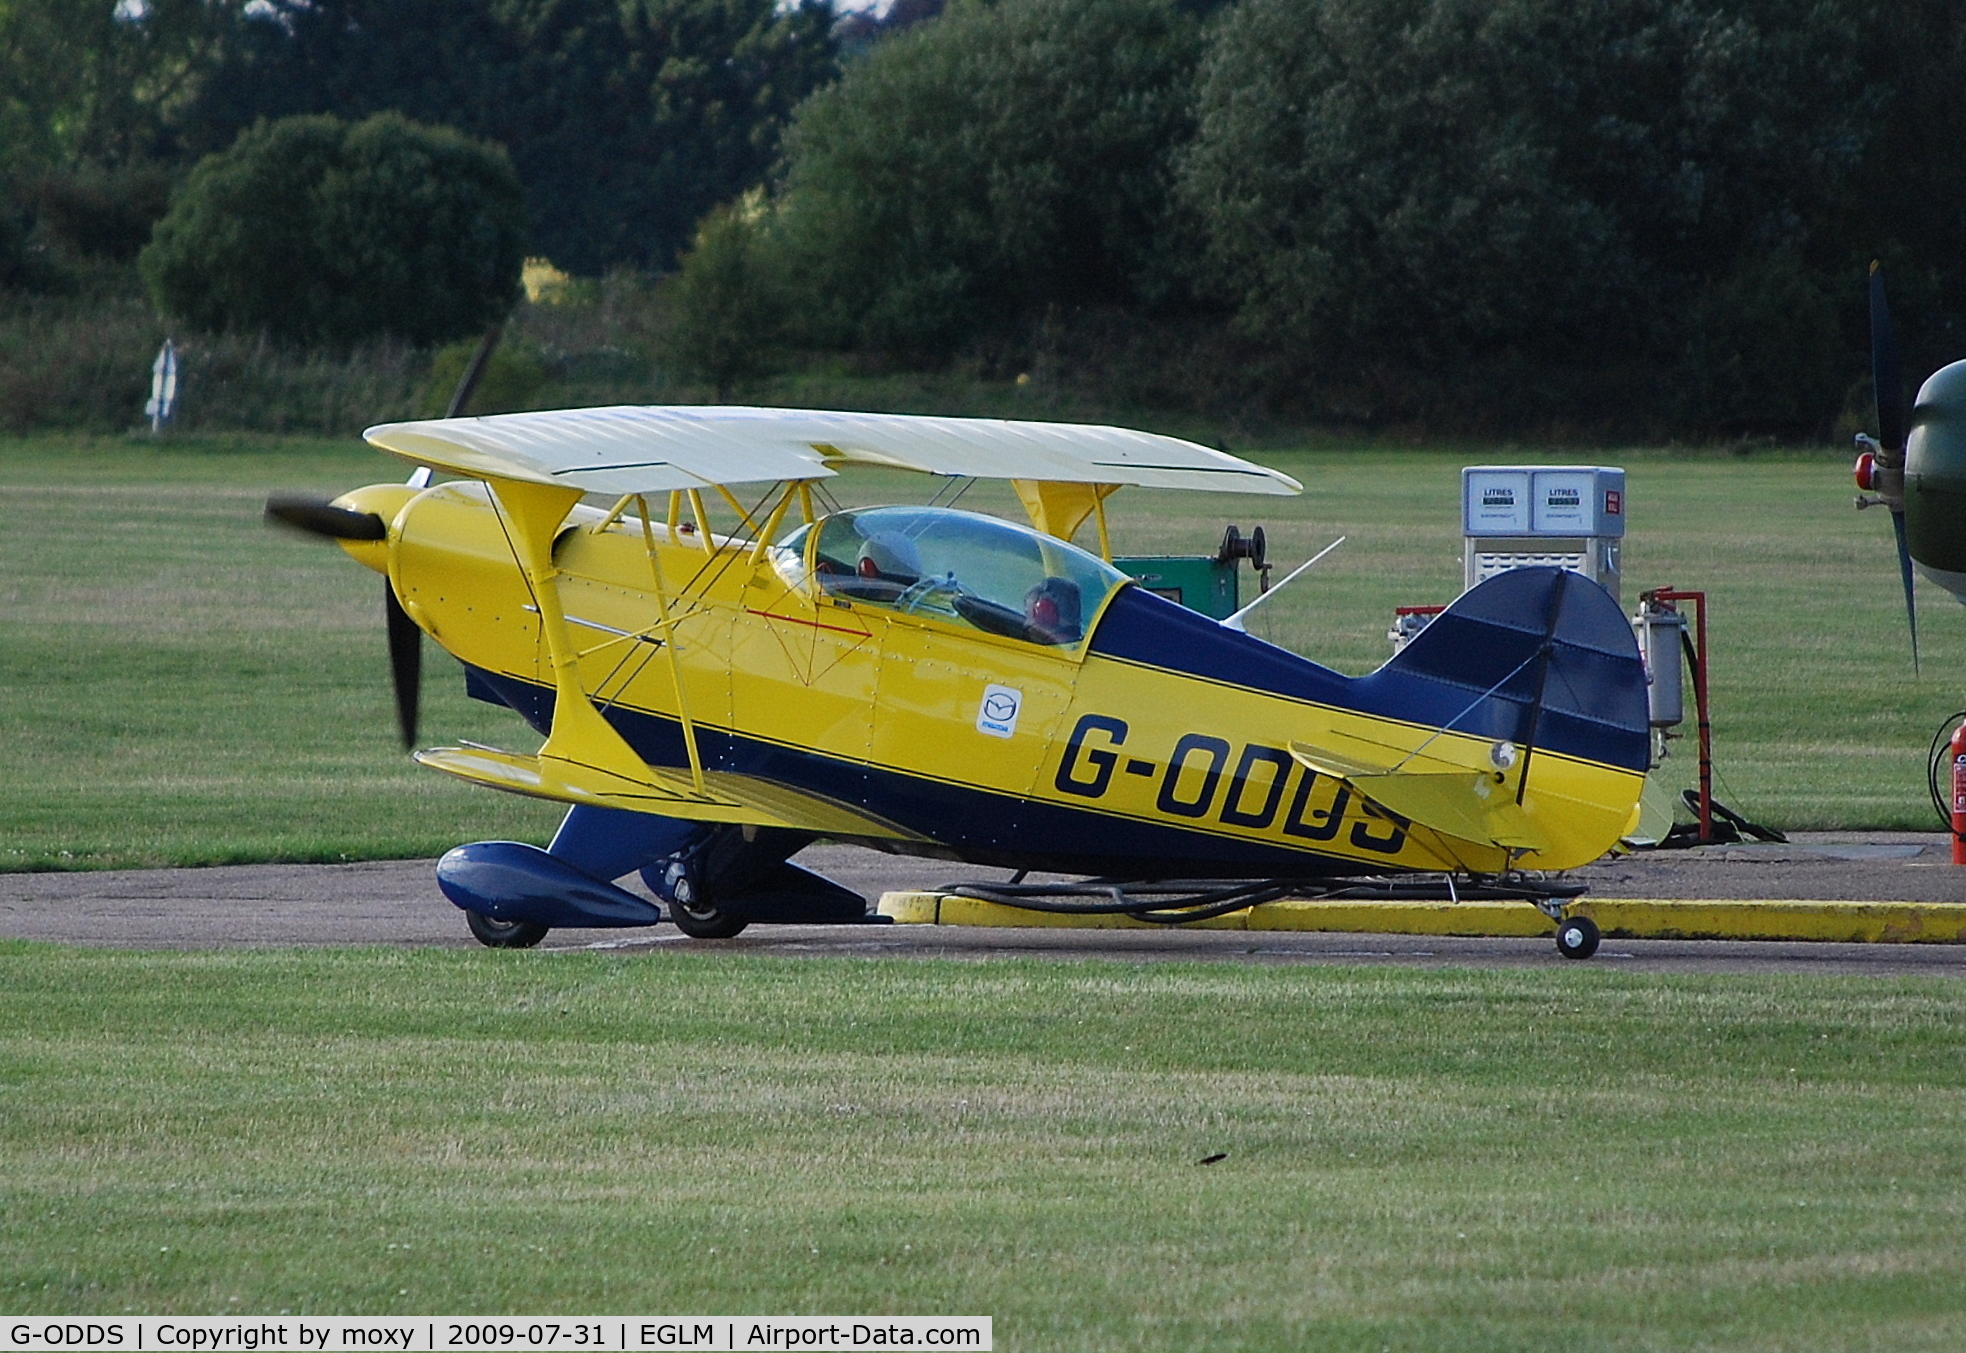 G-ODDS, 1980 Aerotek Pitts S-2A Special C/N 2225, PITS S-2A at the pumps